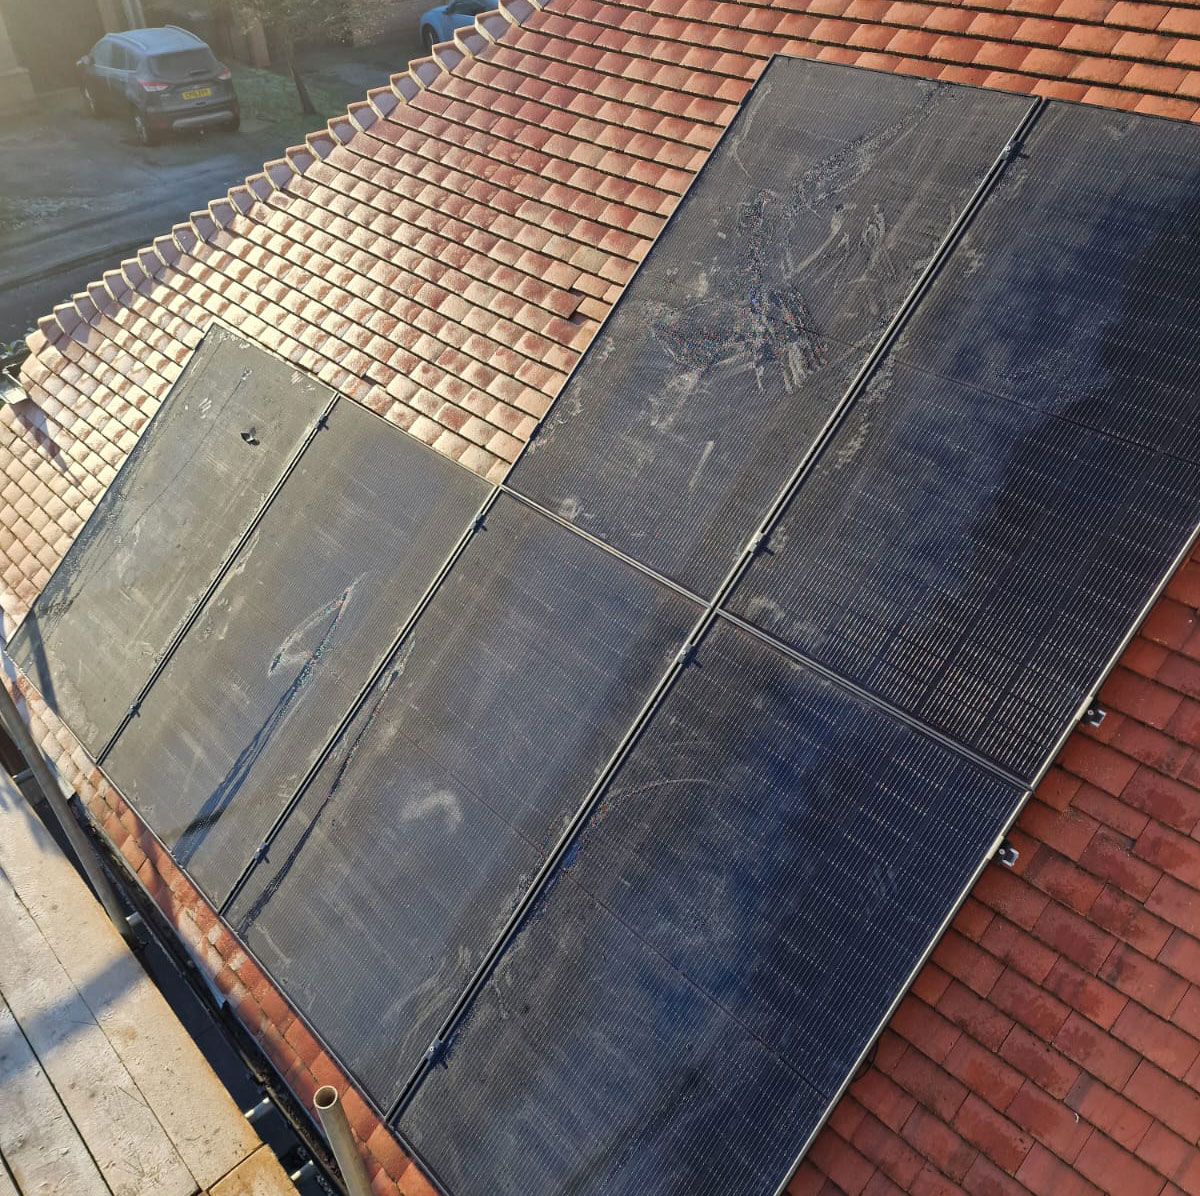 More Solar Panels Protected from Pigeons in Gamston